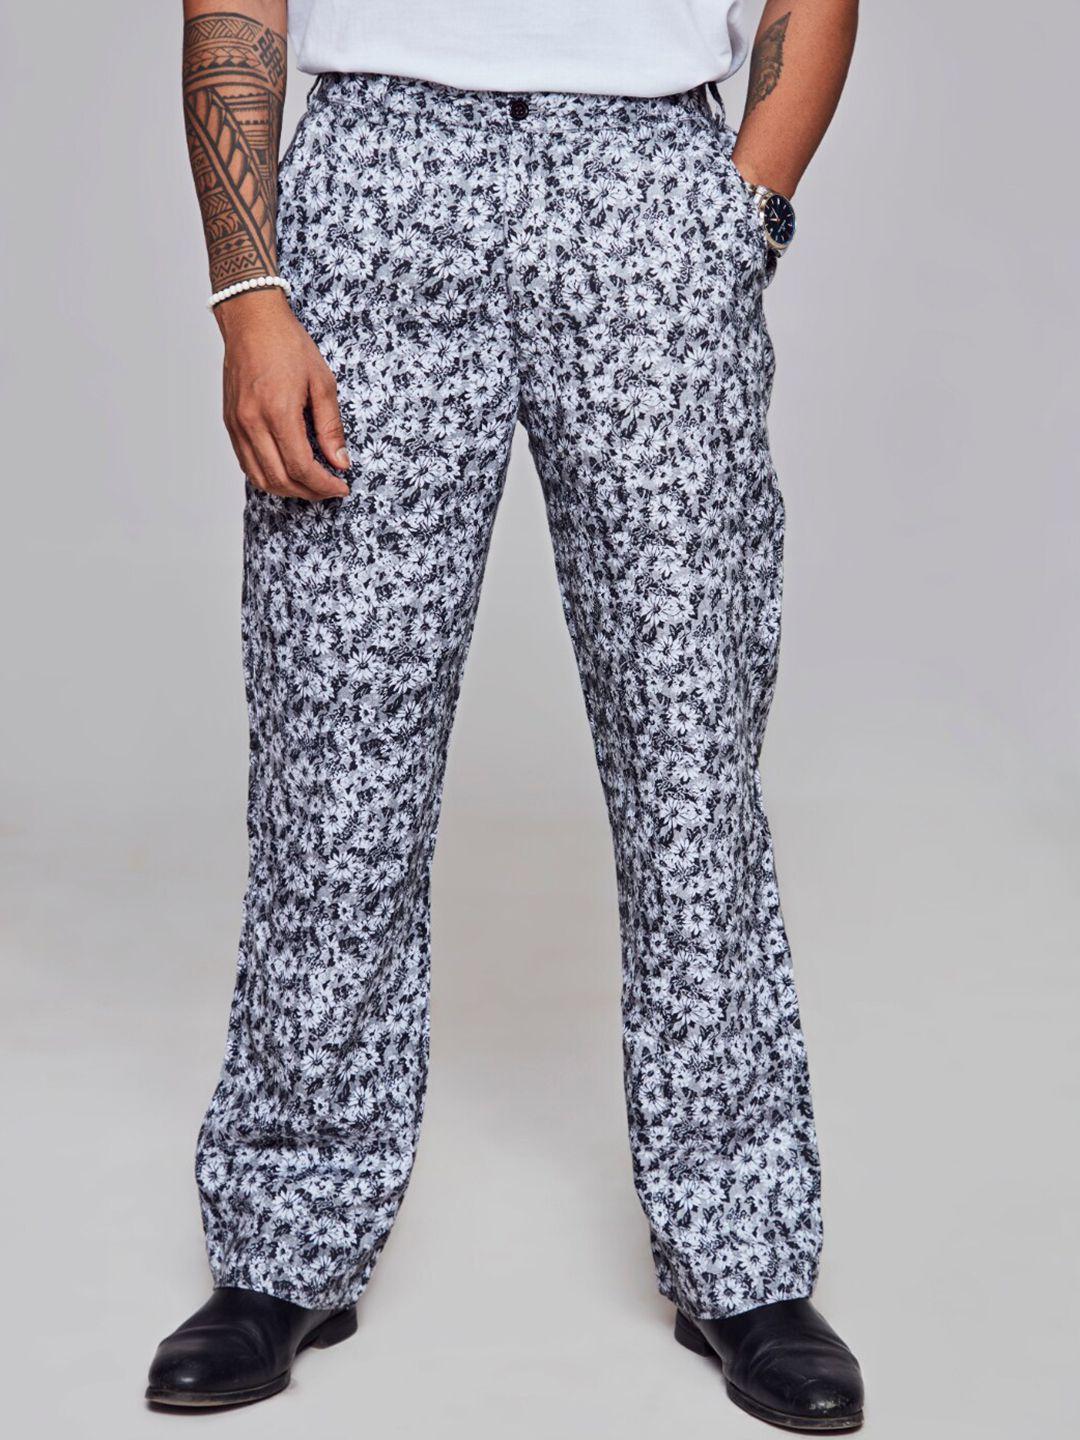 addy's-for-men-floral-printed-mid-rise-linen-trousers